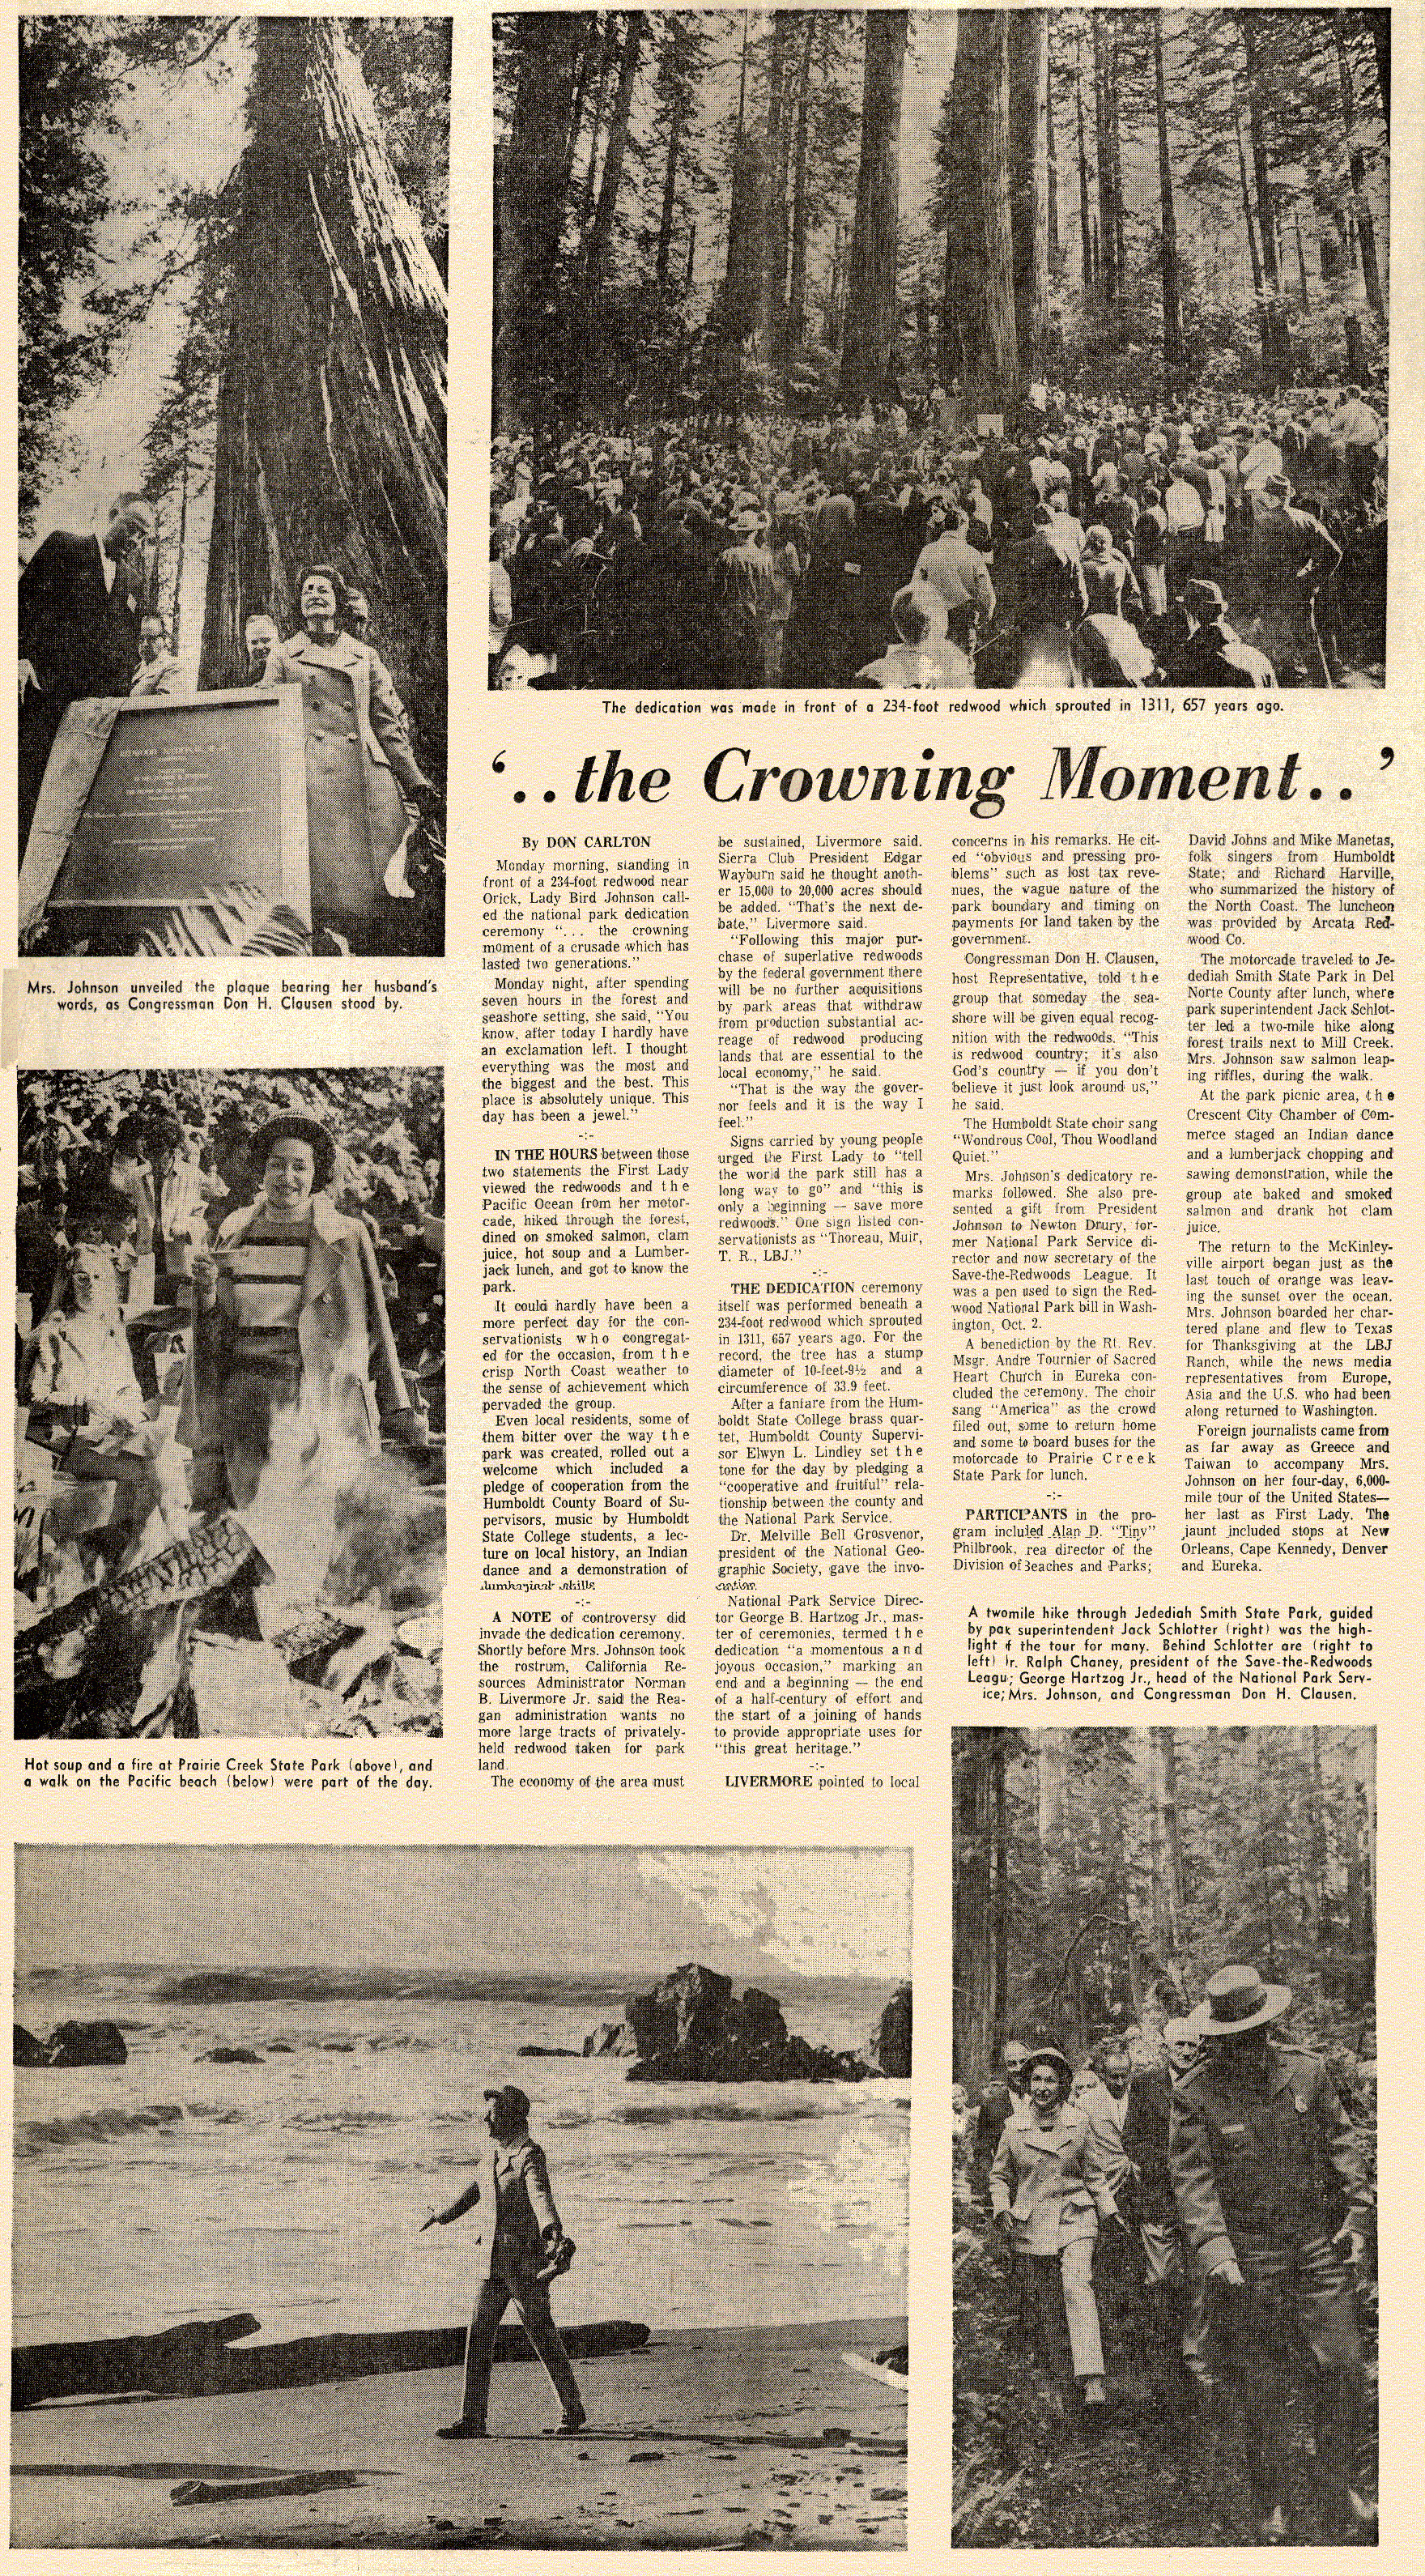 Newspaper article titled "The Crowning Moment"